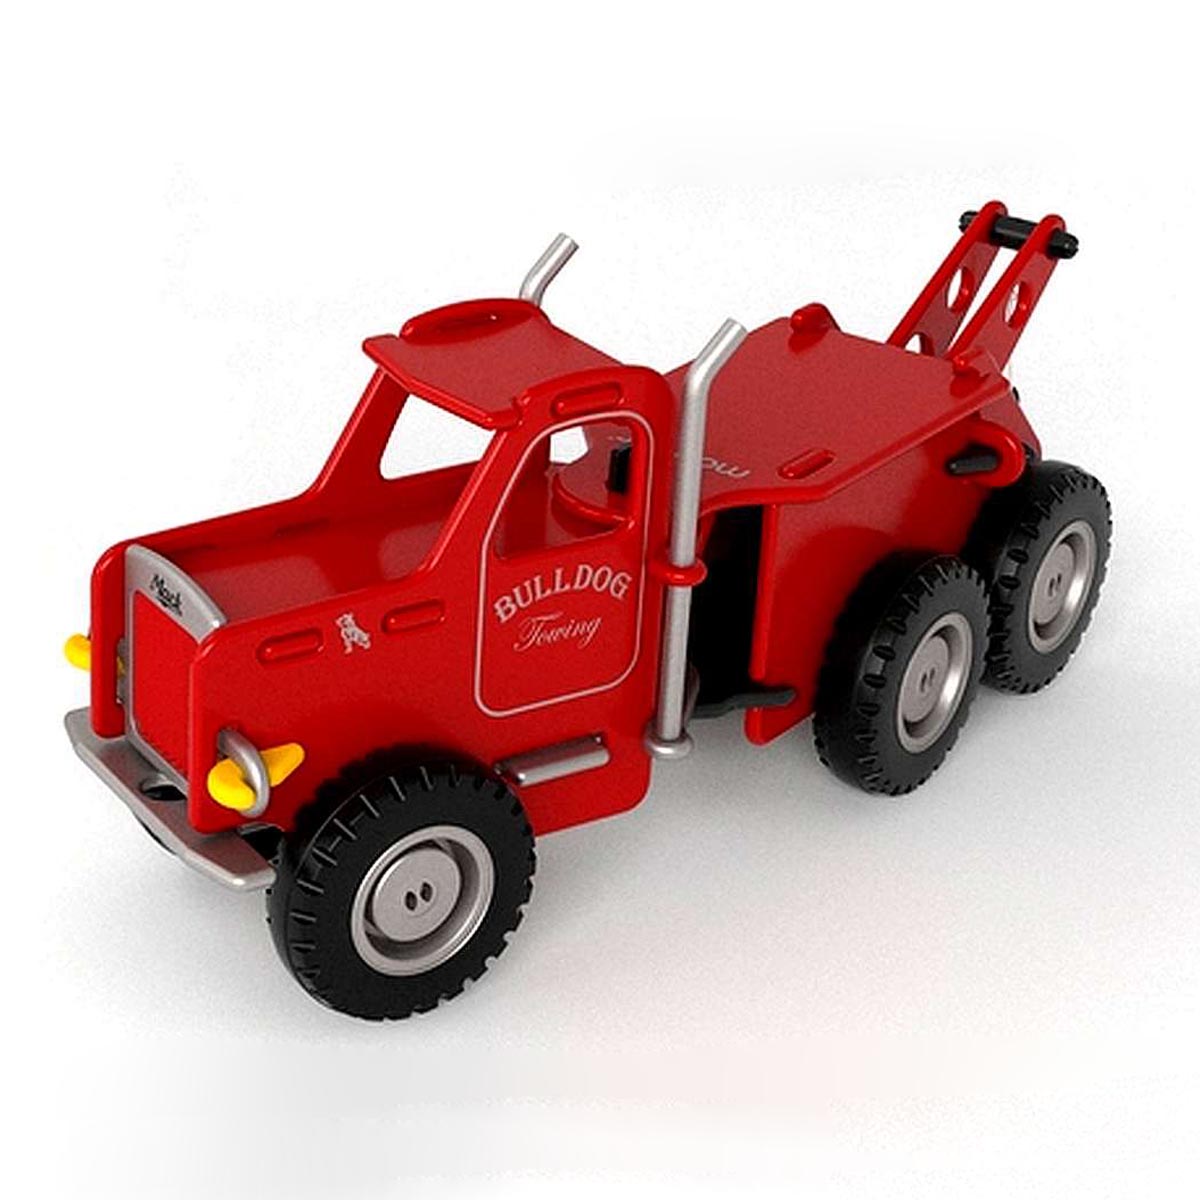 Moover Mack Truck Red